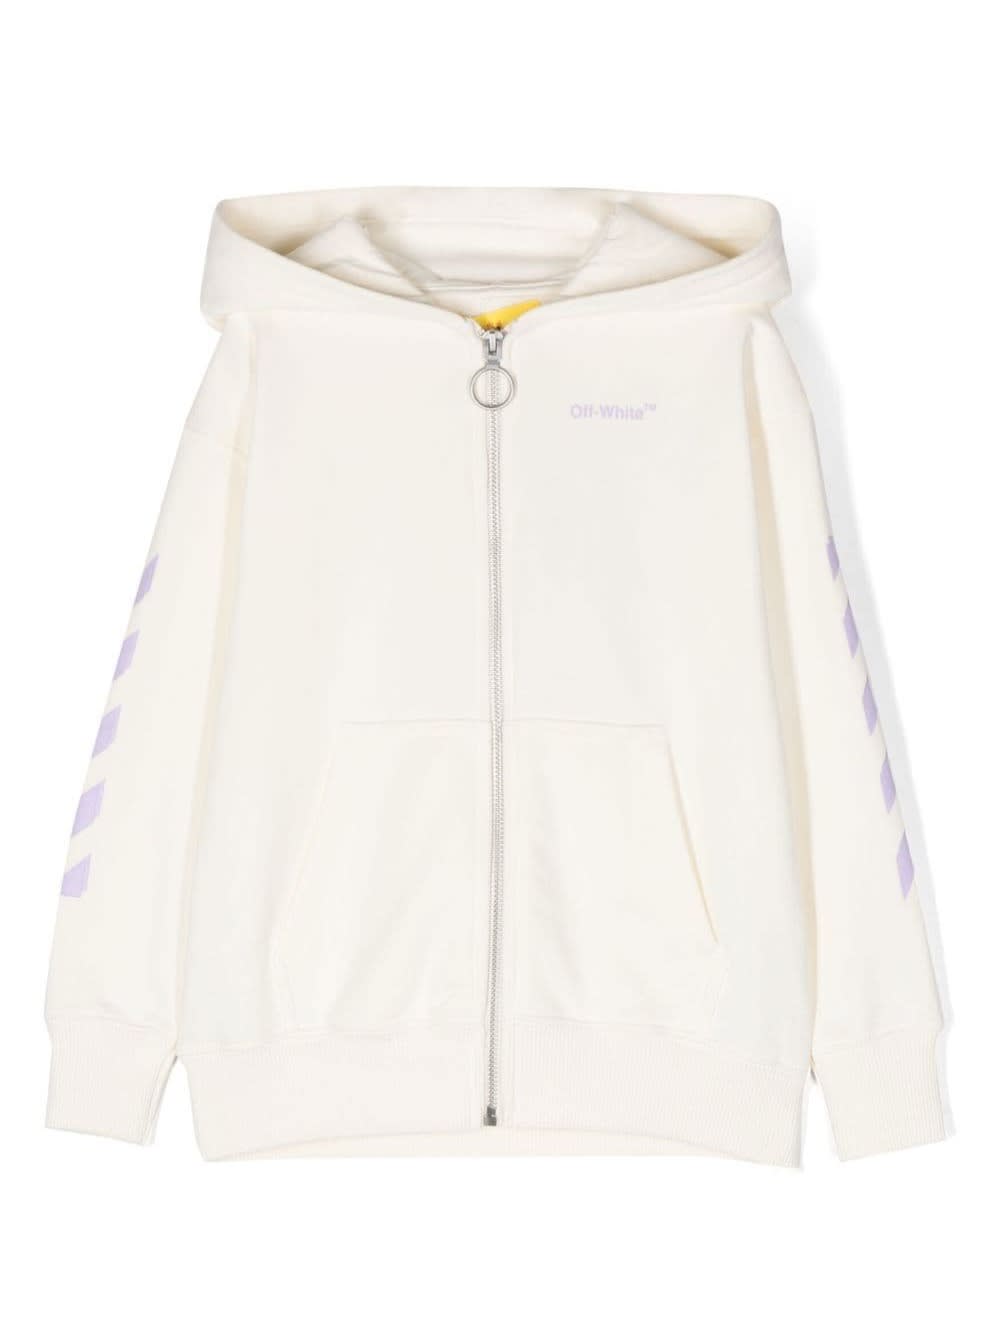 OFF-WHITE ZIP-UP HOODIE WITH SIGNATURE ARRROW MOTIF IN WHITE COTTON GIRL